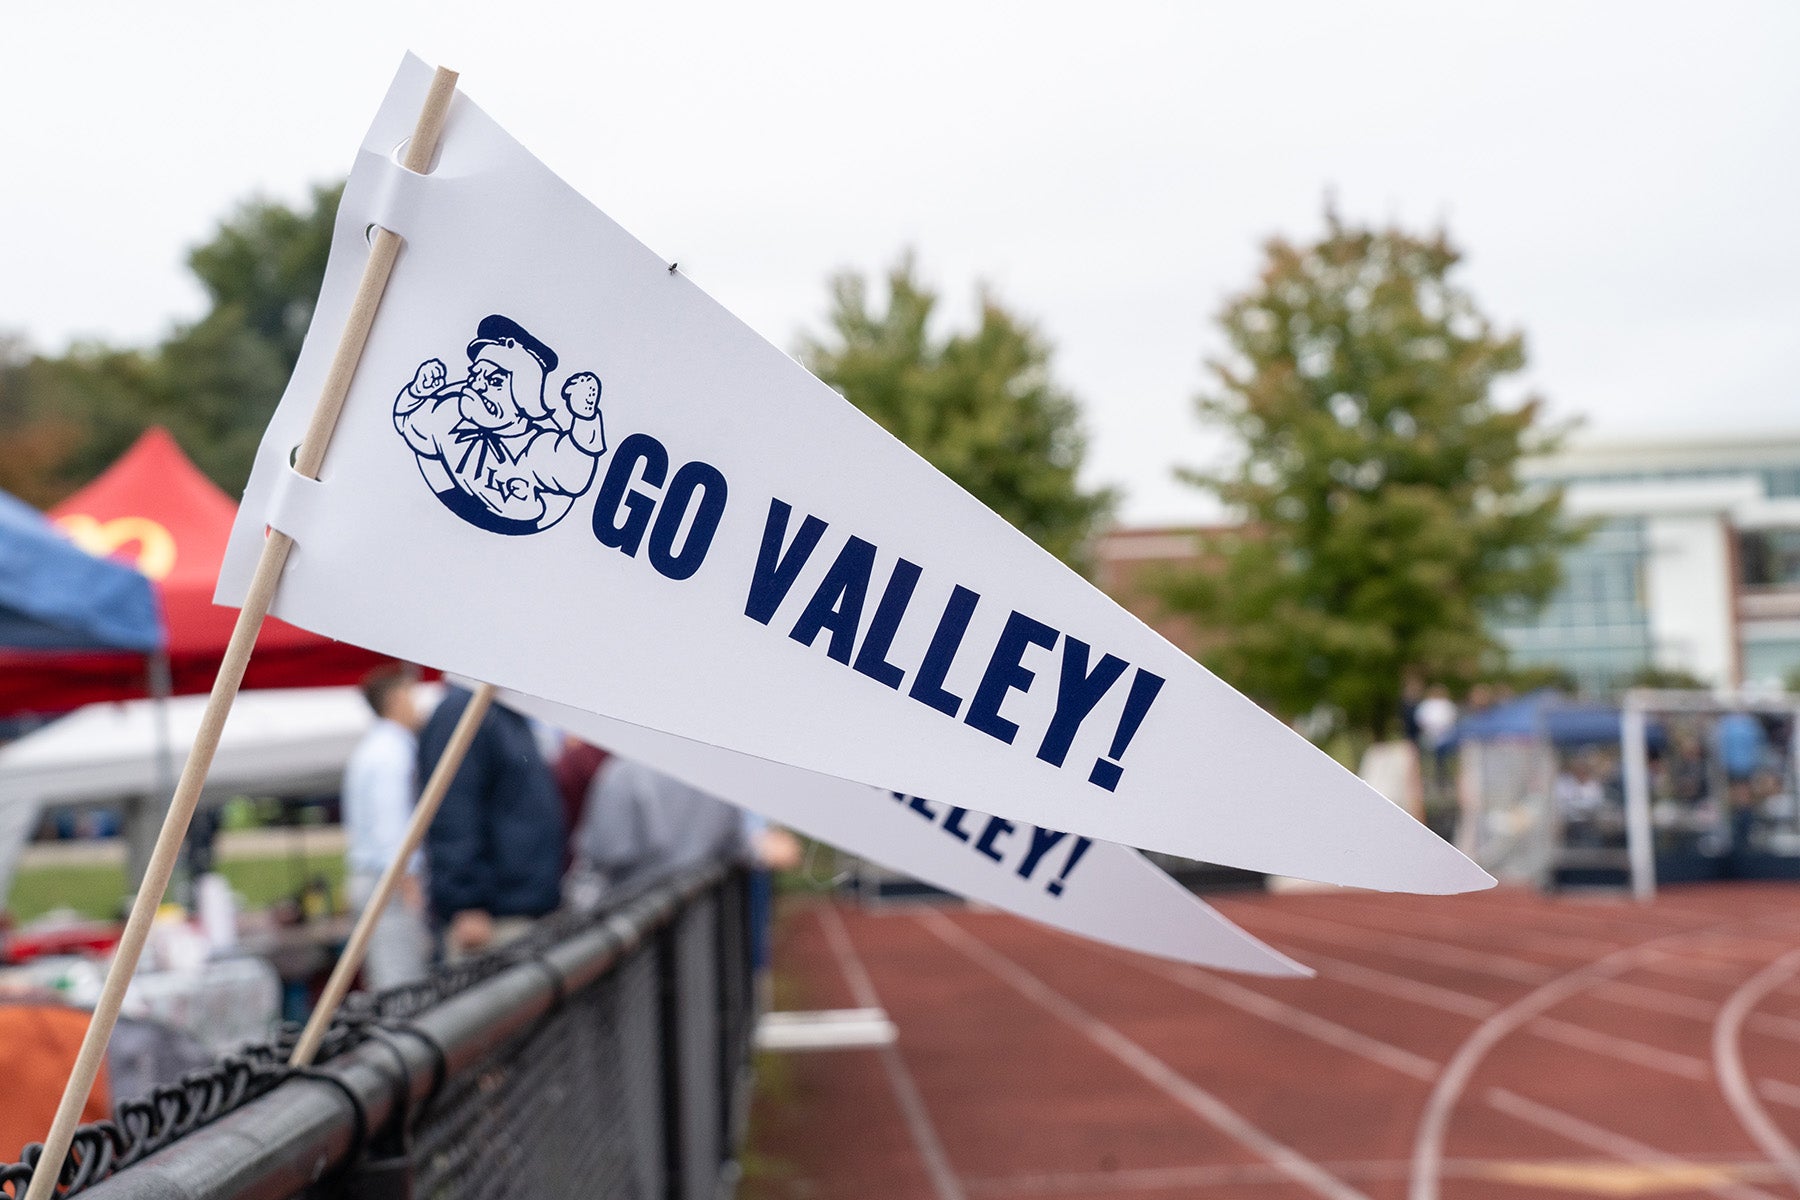 LVC sports pennant reading "Go Valley"